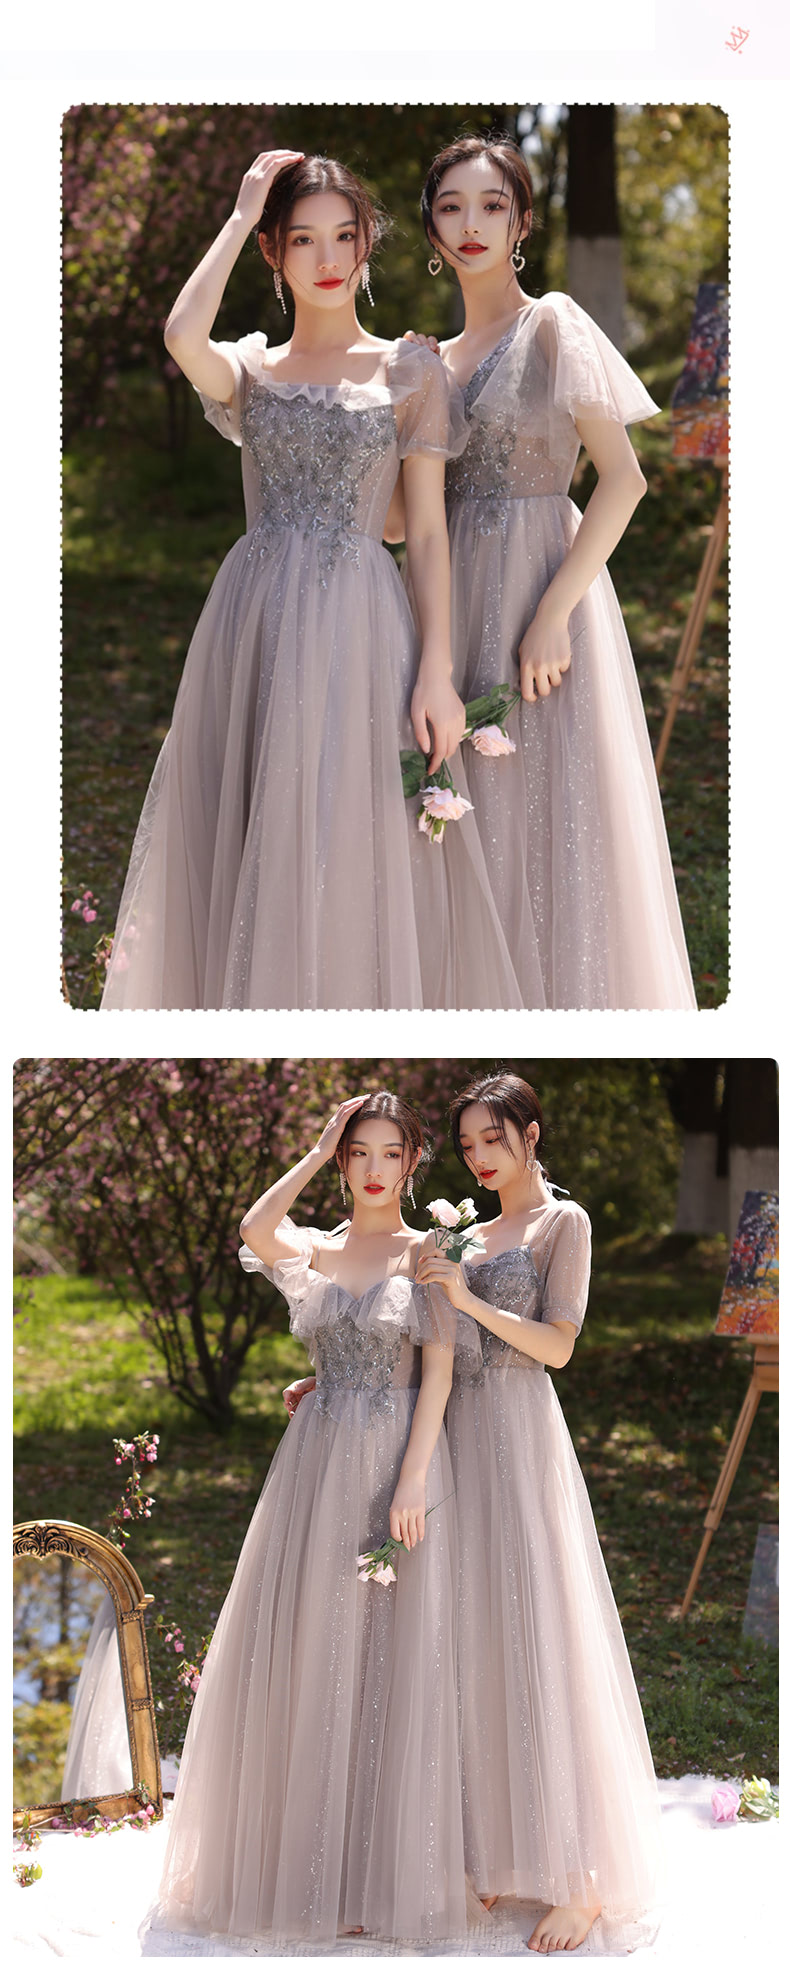 A-Line-Gray-Bridesmaid-Long-Dress-Lace-Floral-Embroidery-Party-Gown12.jpg